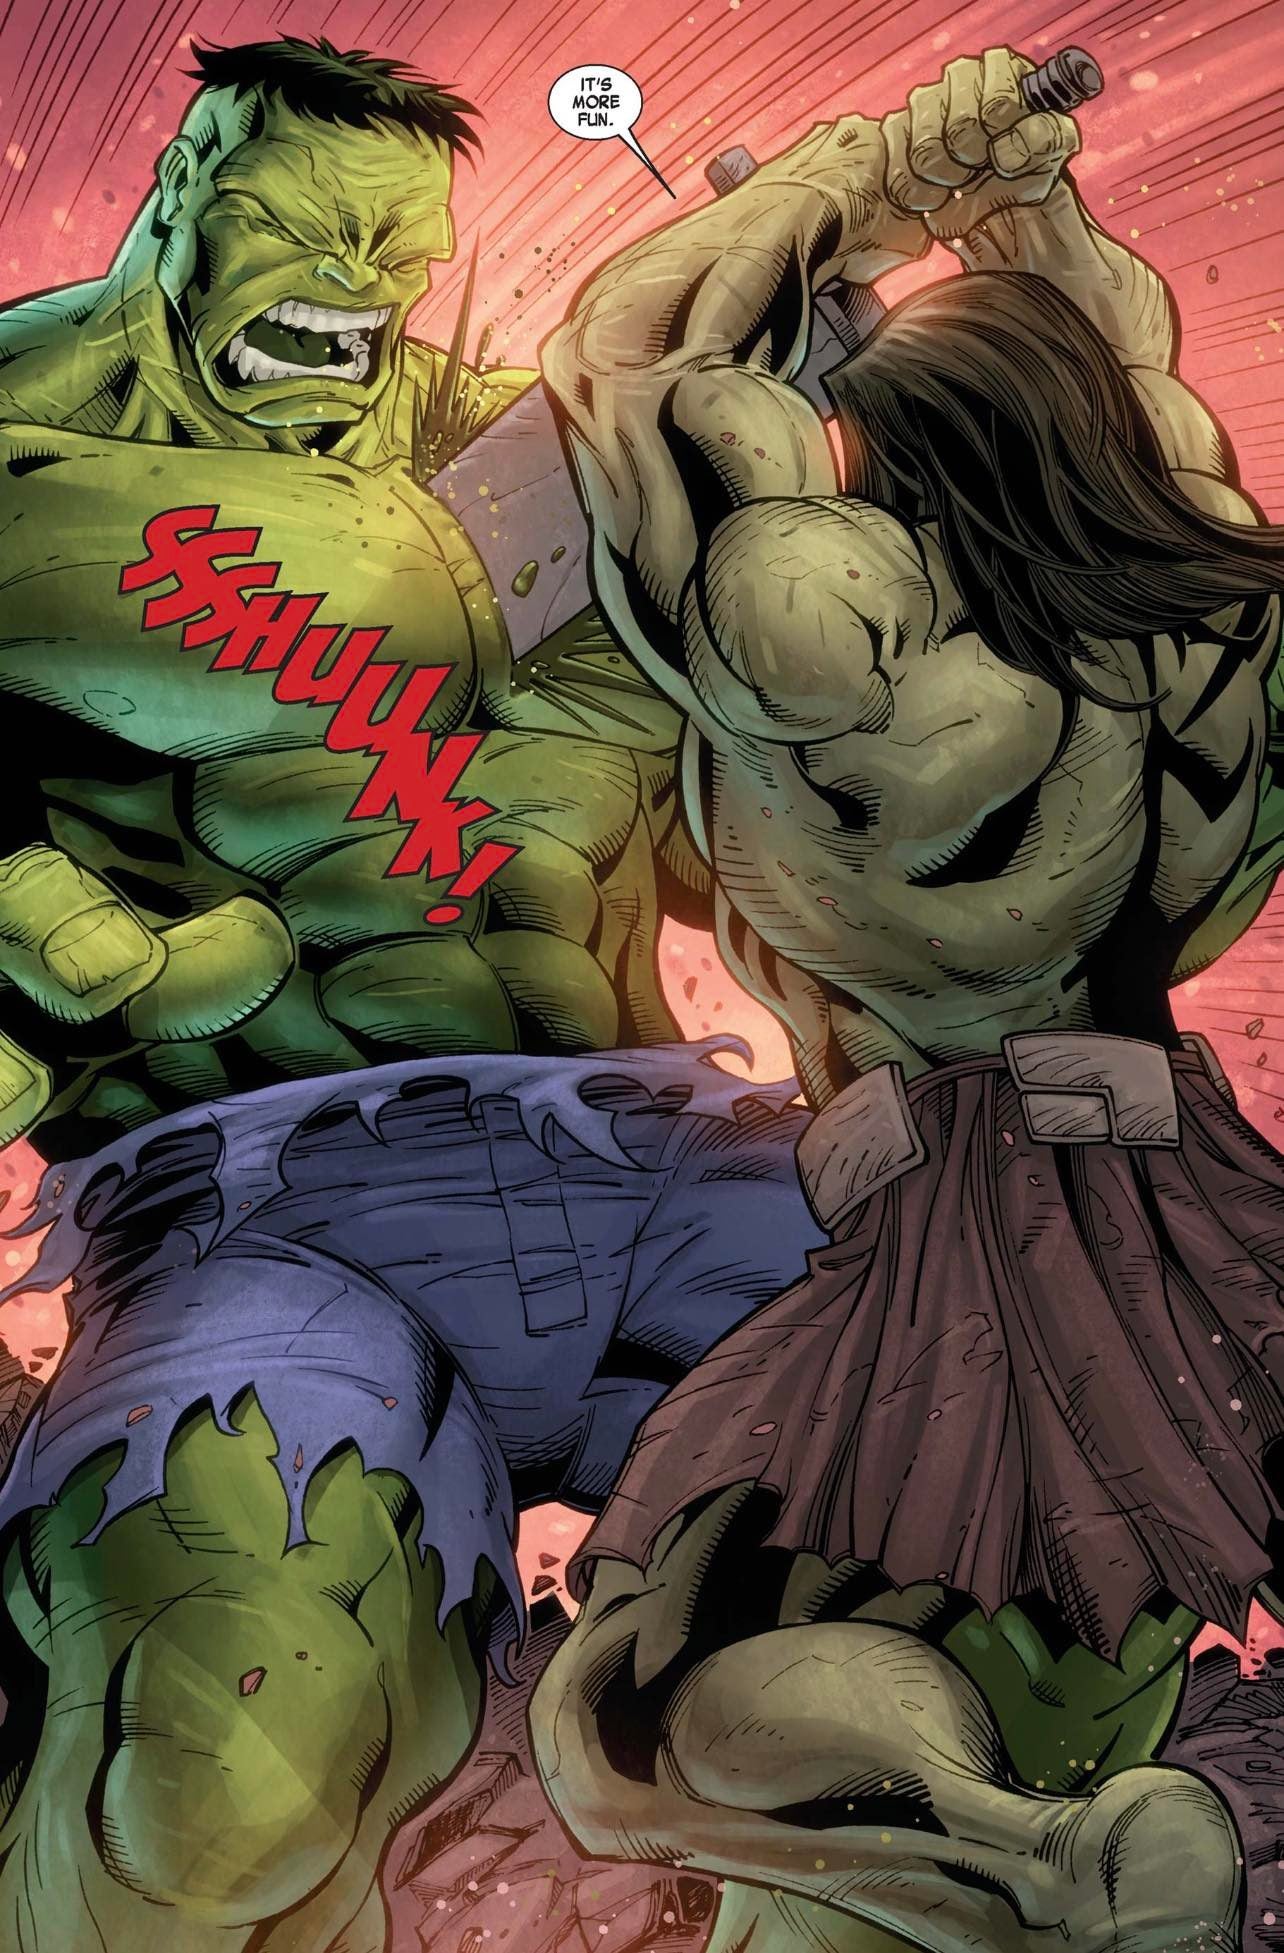 Skaar stabs his father (penciled by Rodney Buchemi)